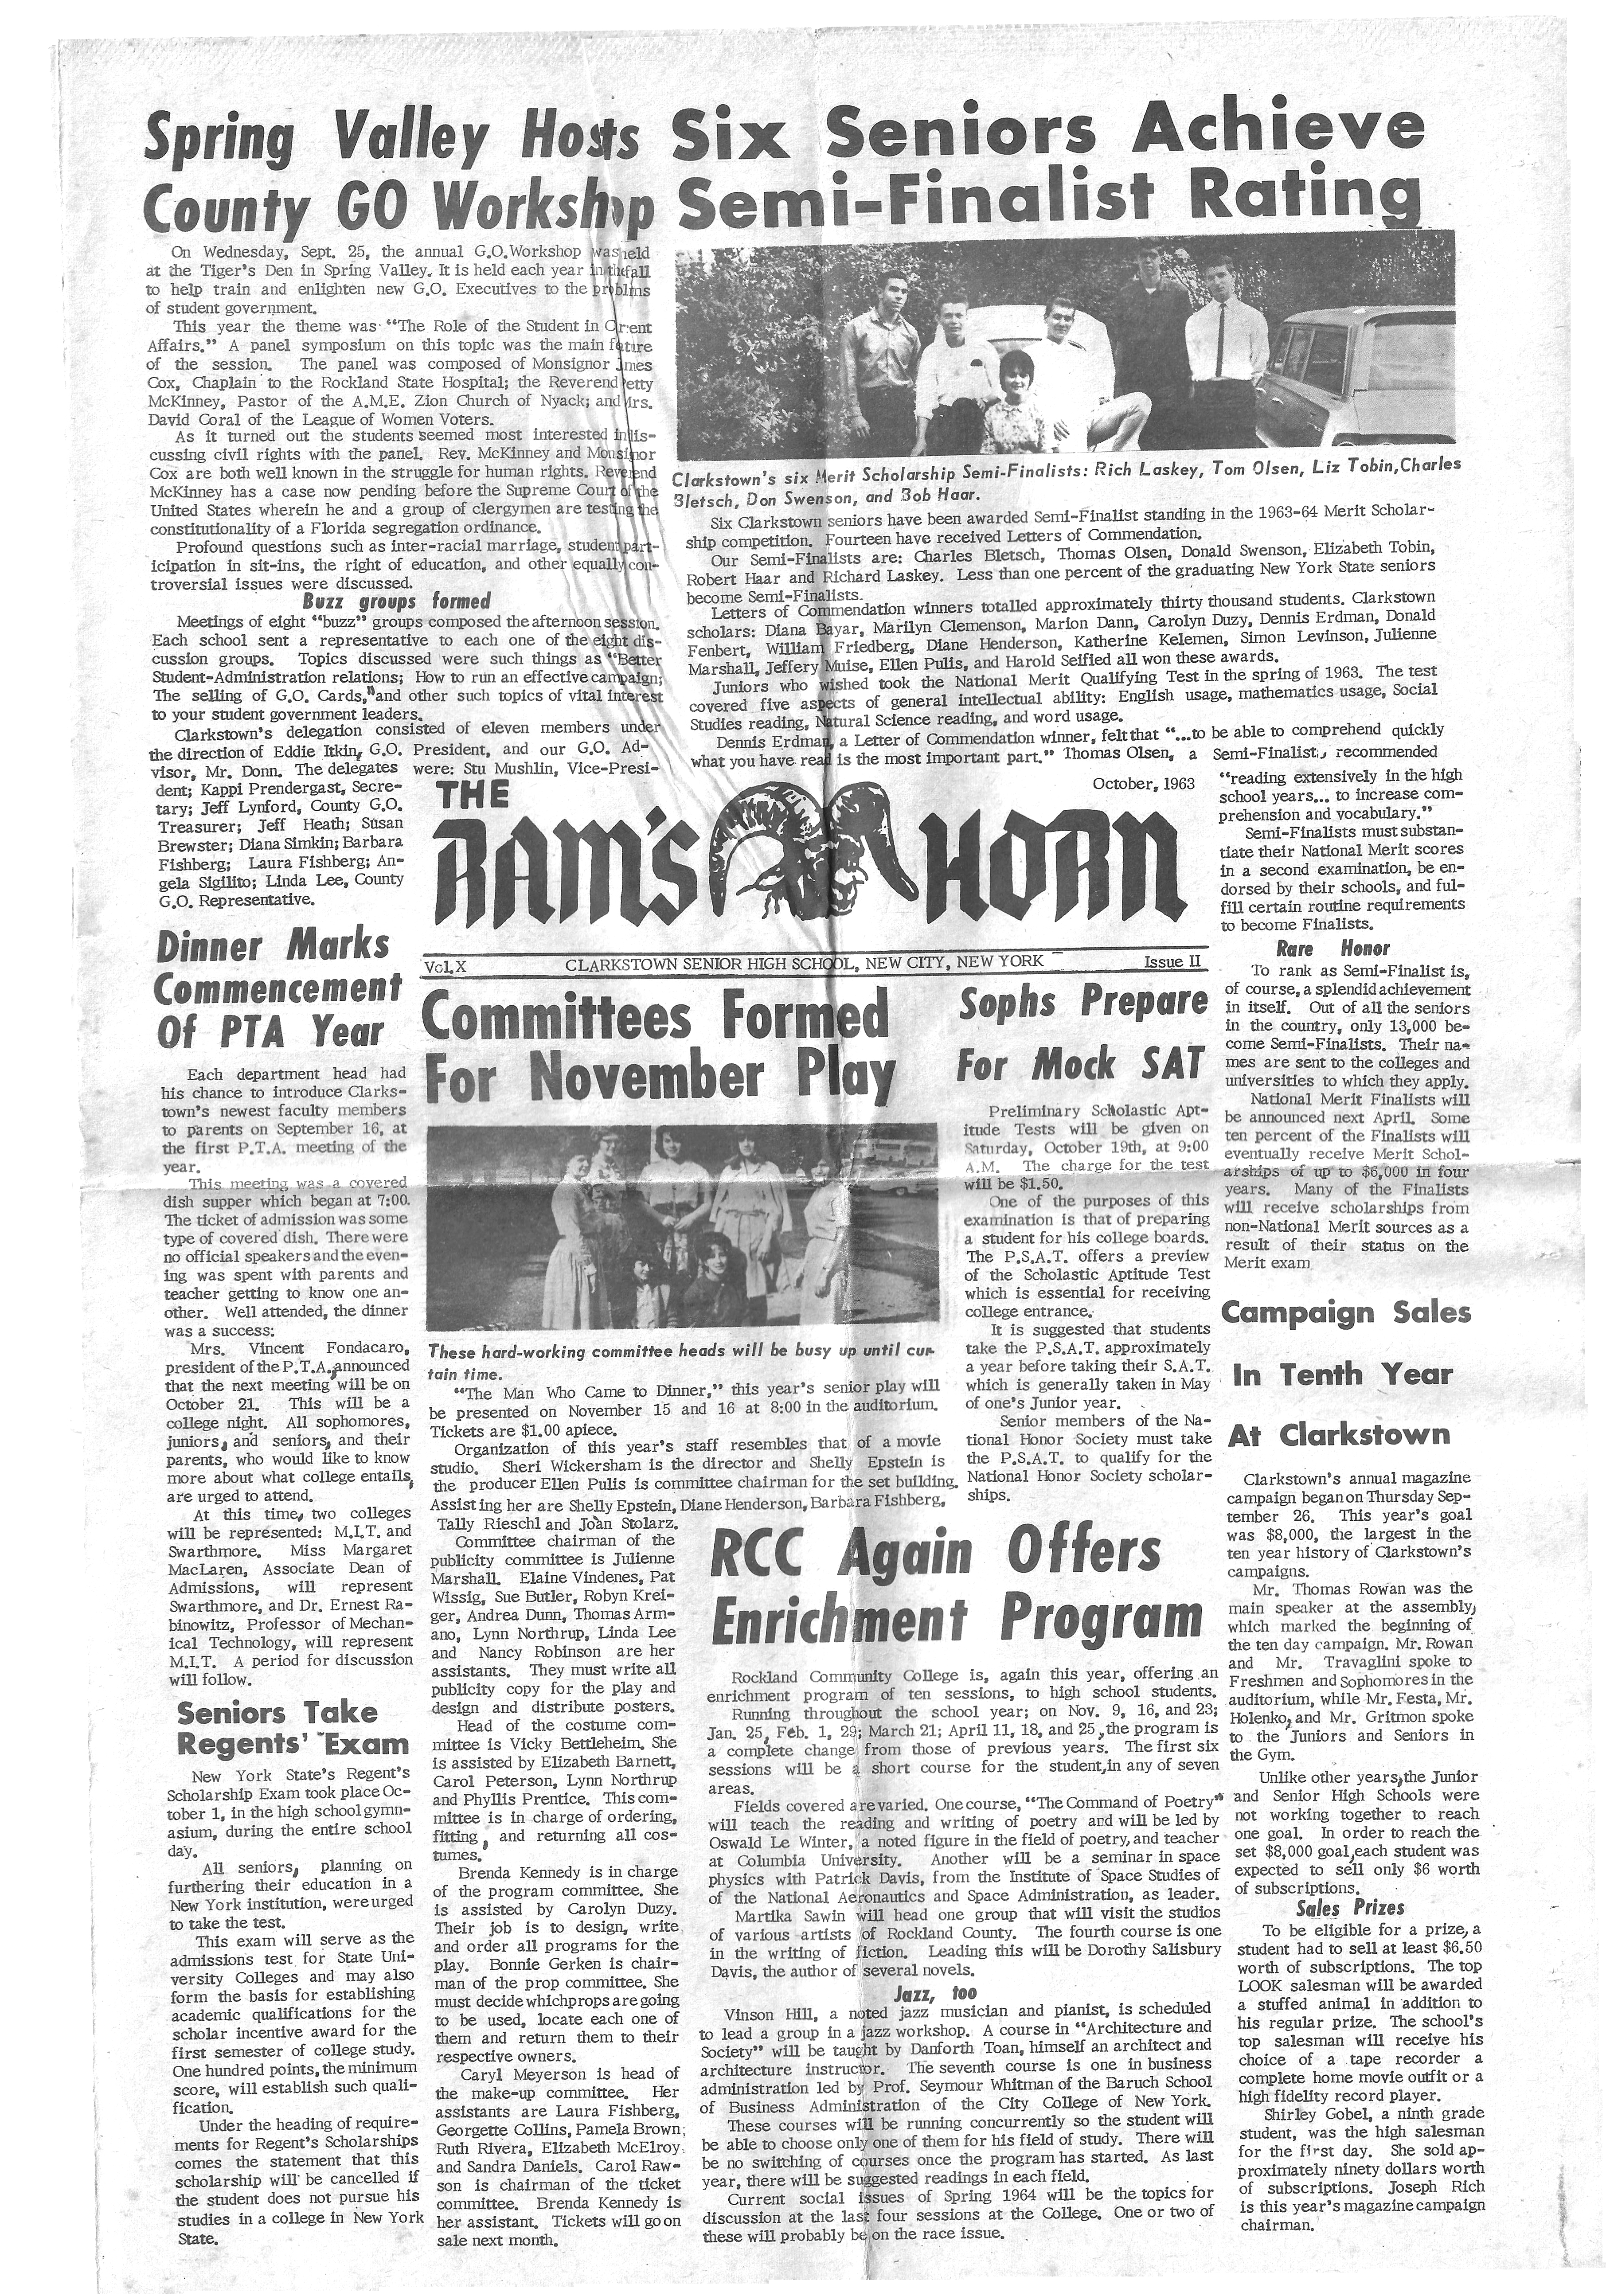 The Ram's Horn - October 1963 - Page 1